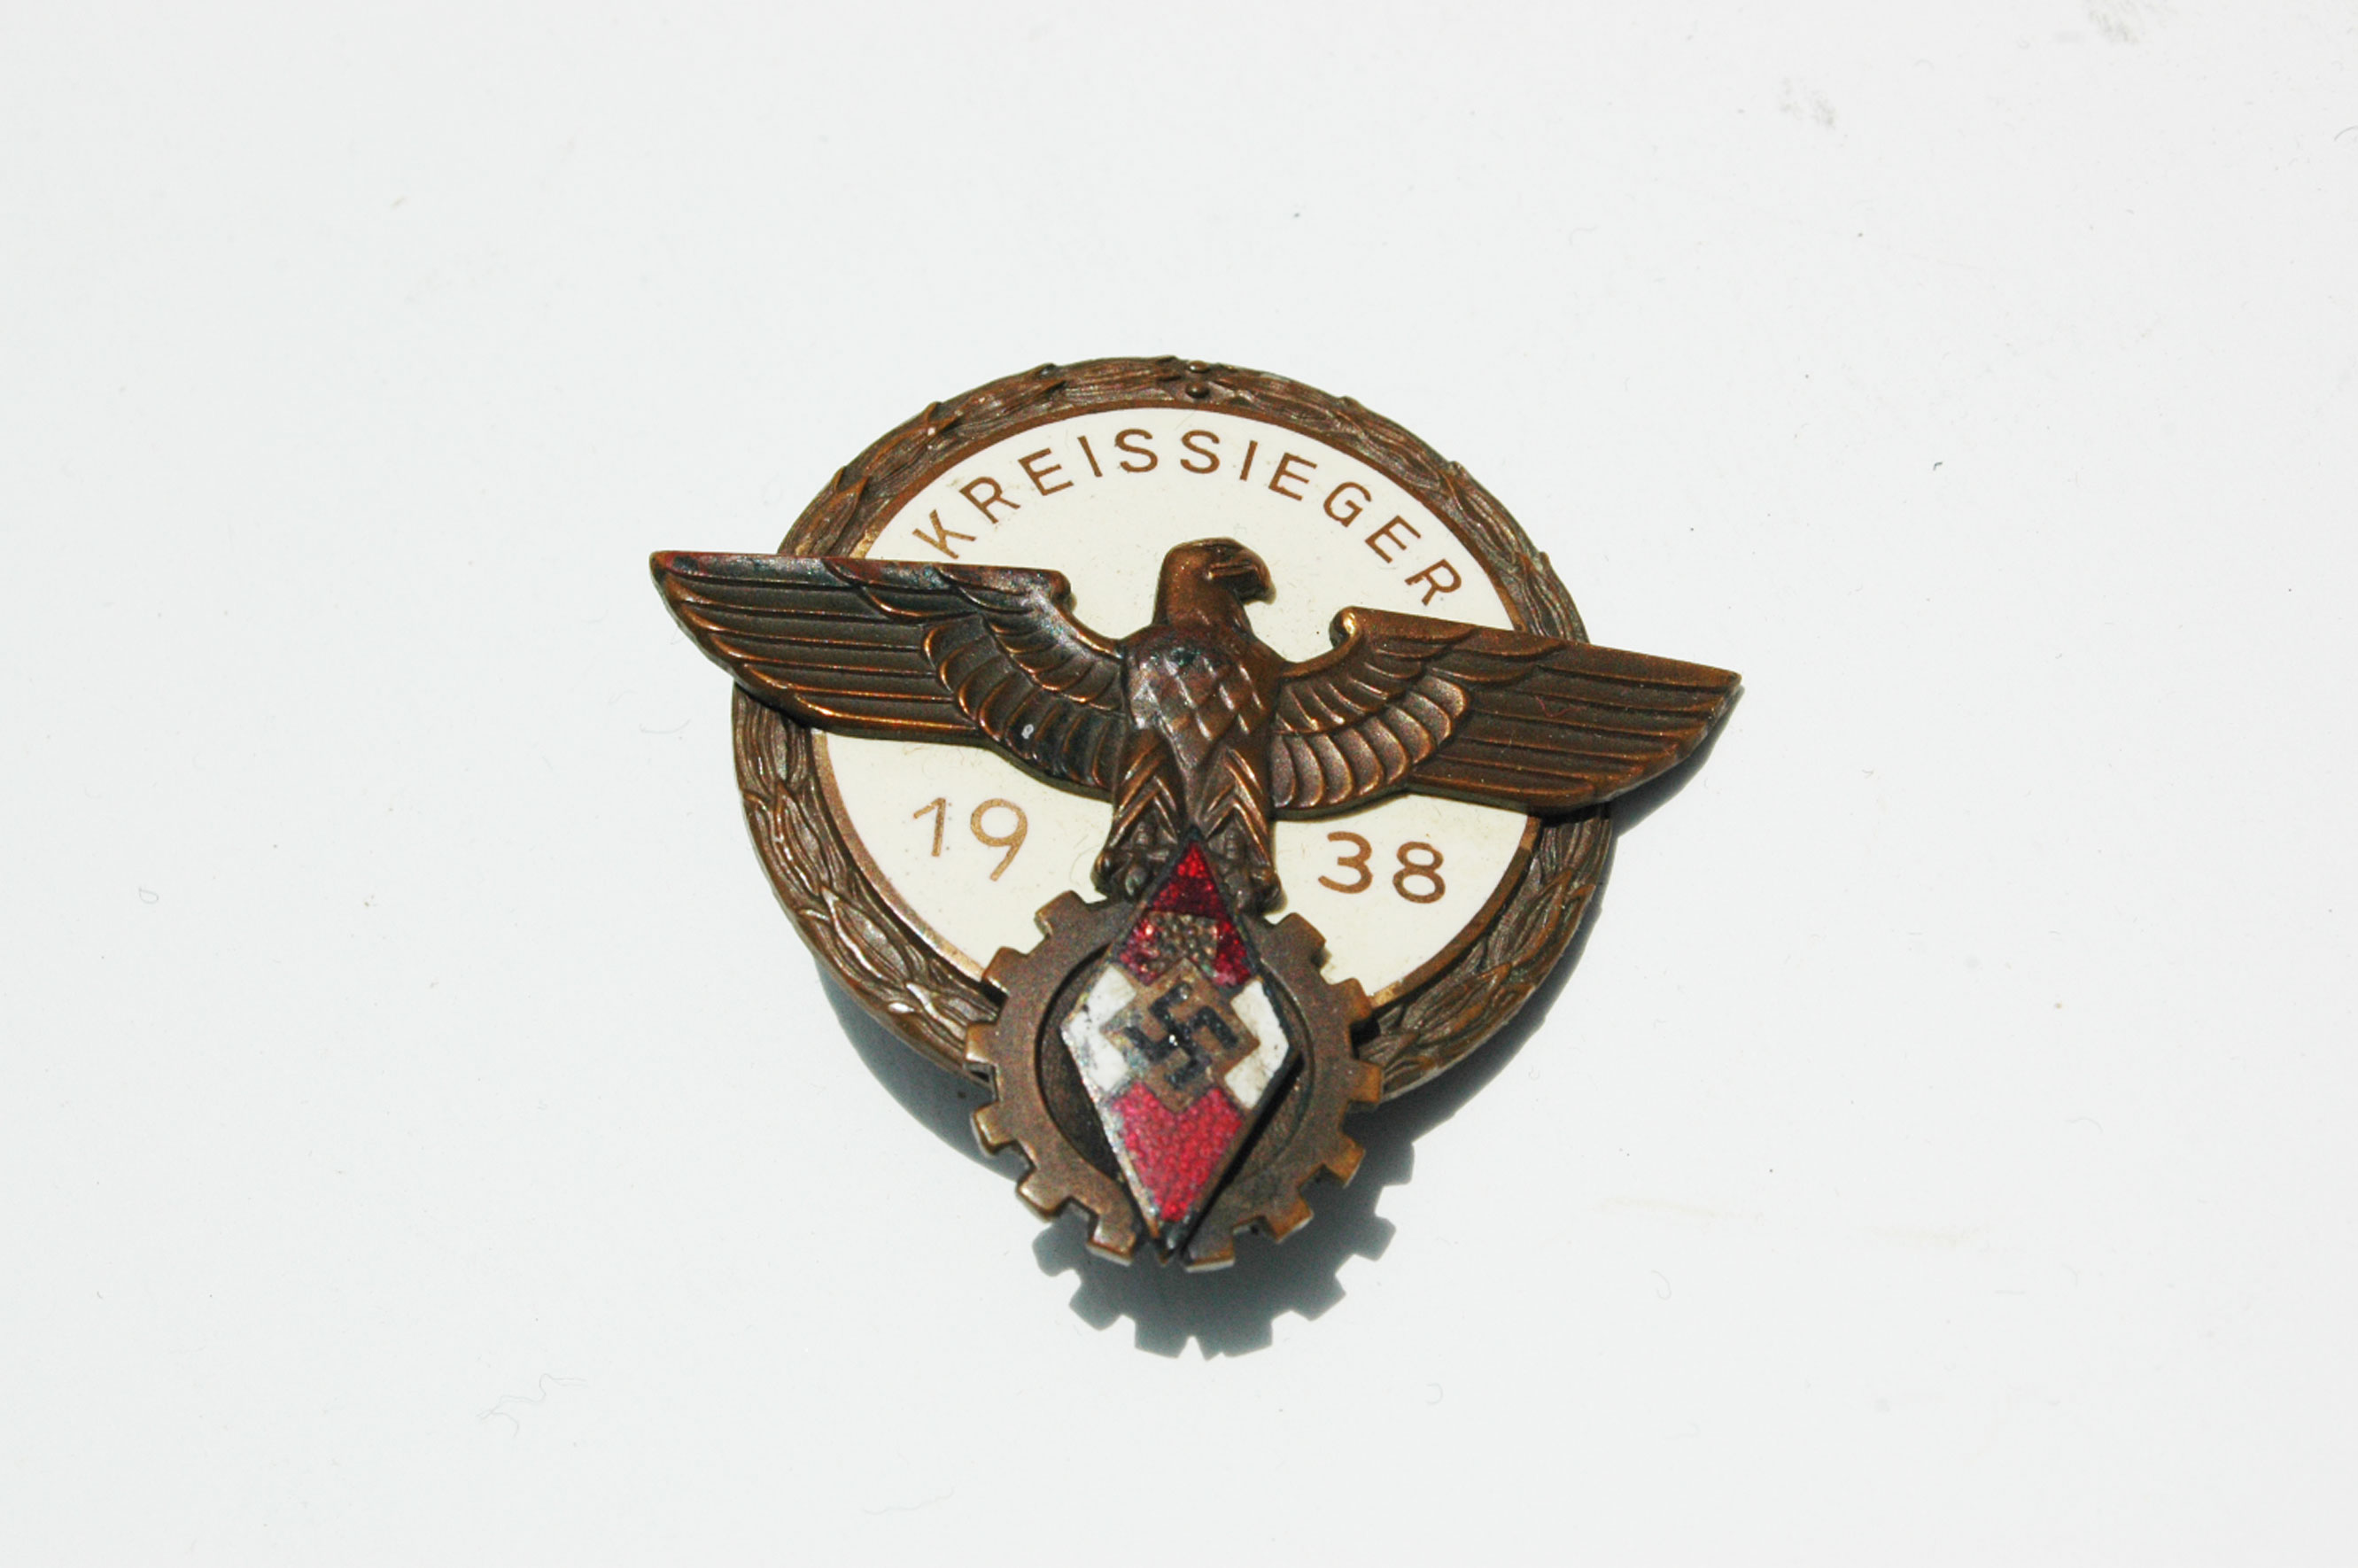 HJ and DAF Kreiss Level National Trade Competition Badge